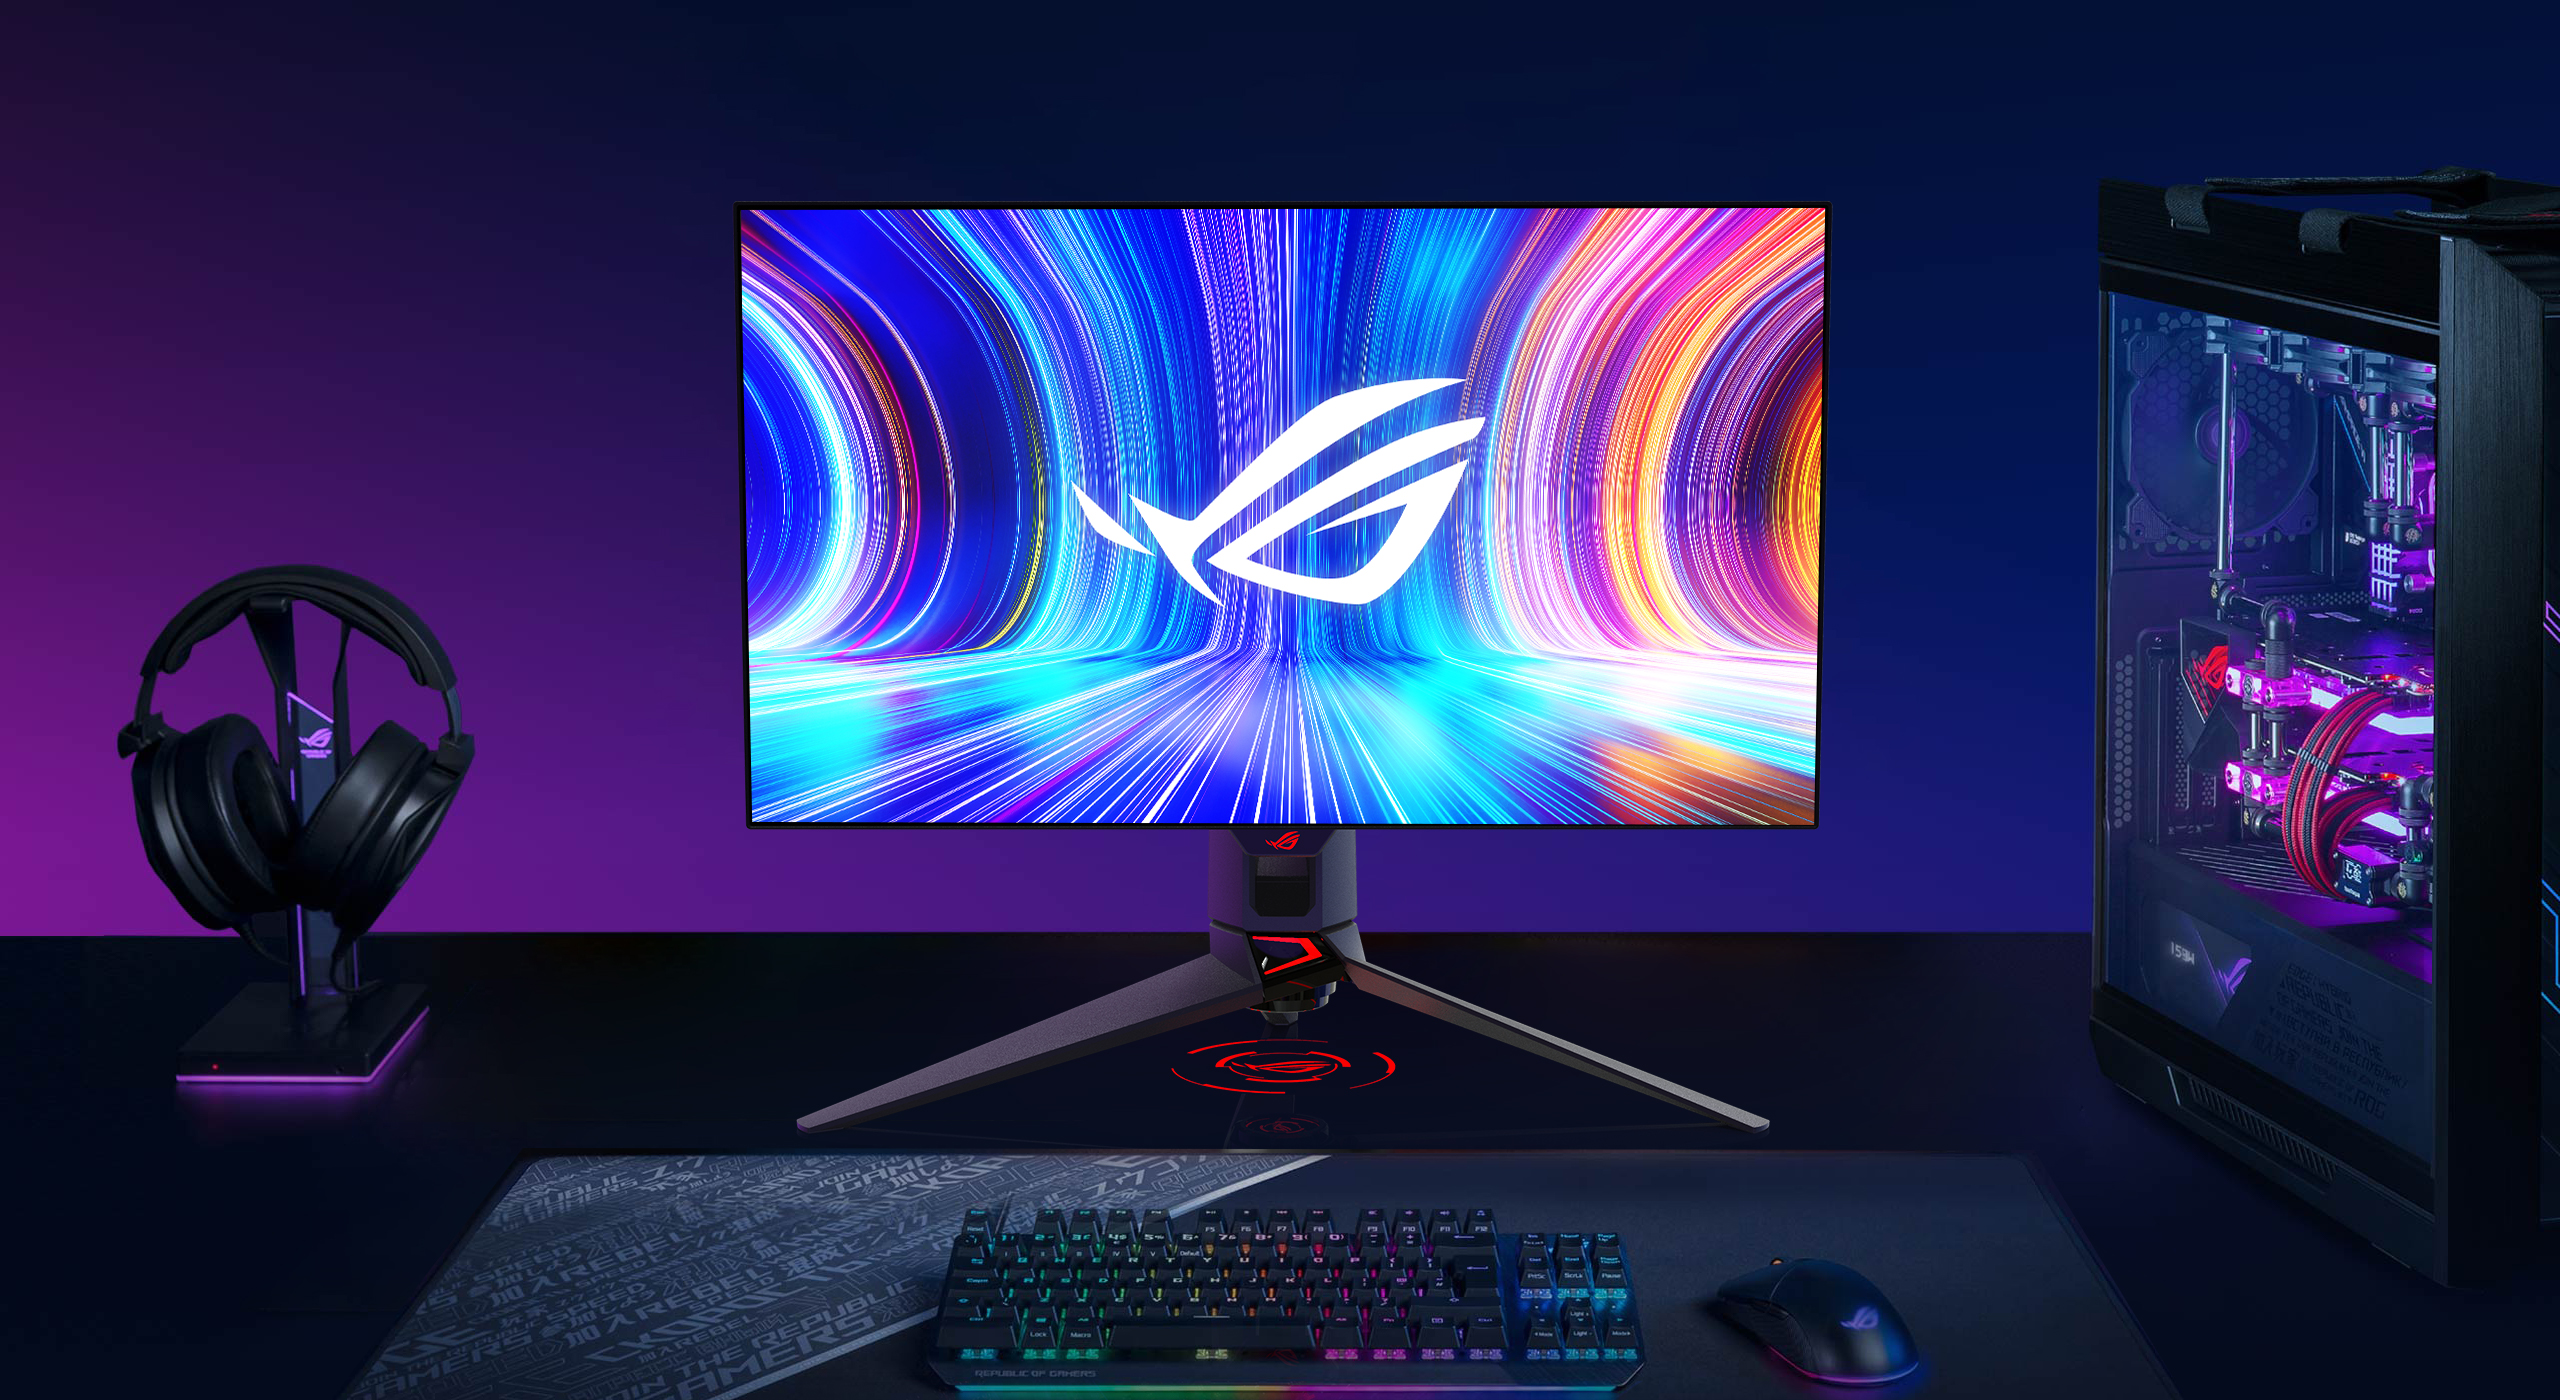 Asus ROG Swift OLED PG27 gaming monitor announced at CES 2023.